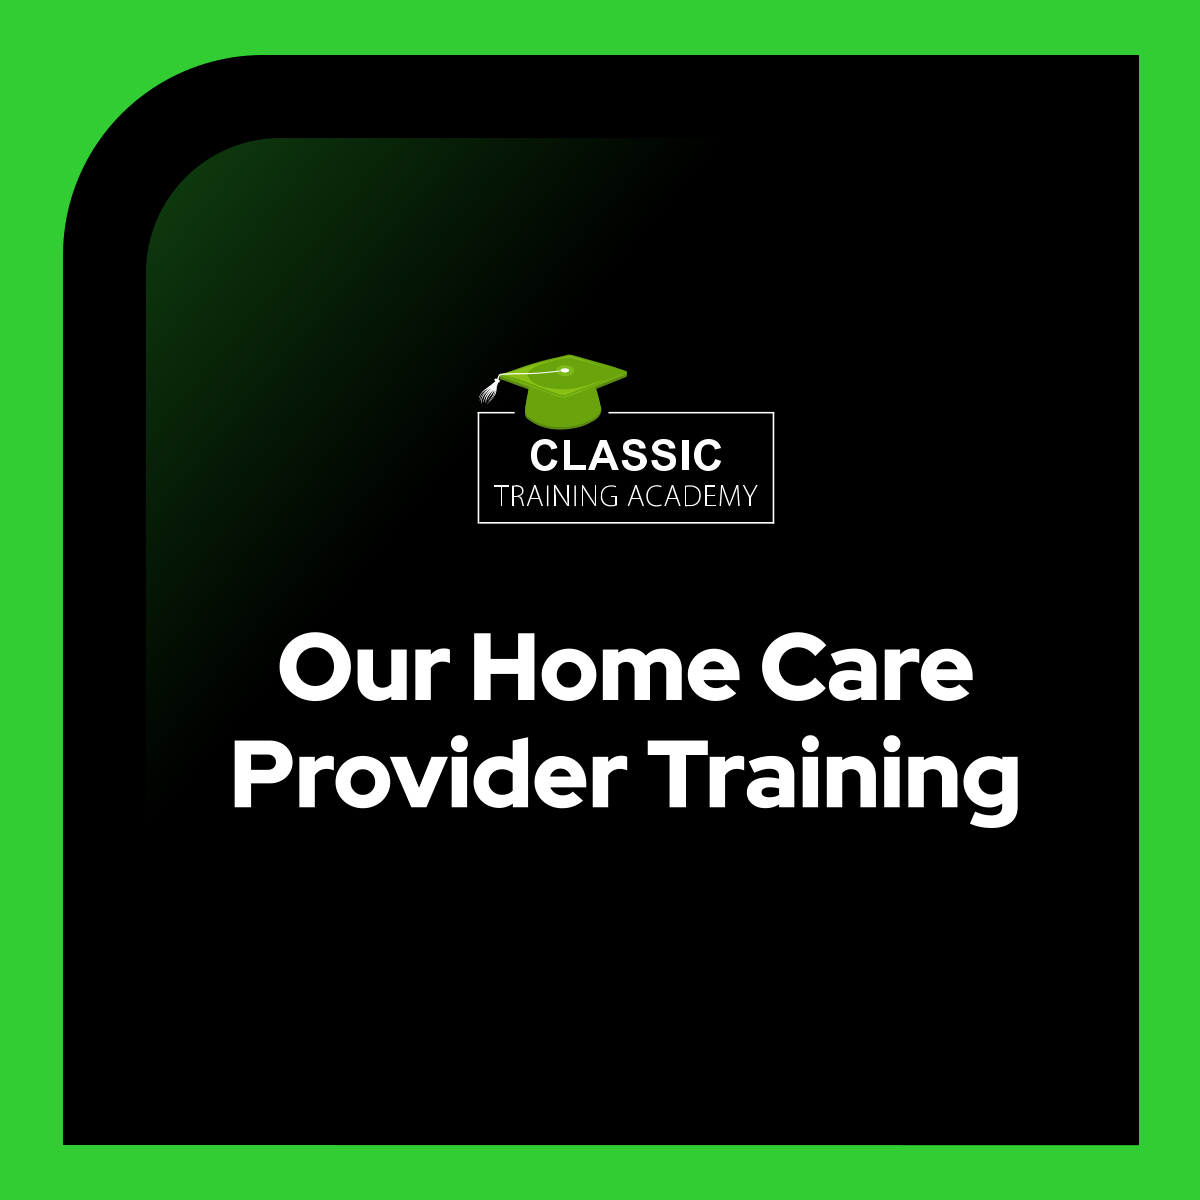 Provide personalized, professional healthcare right in the comfort of your client’s home with our program. 

It’s time to discover our Home Care Provider Training today!

#HomeCareProvider #TrainingProgram #RaleighNC #HealthcareTraining